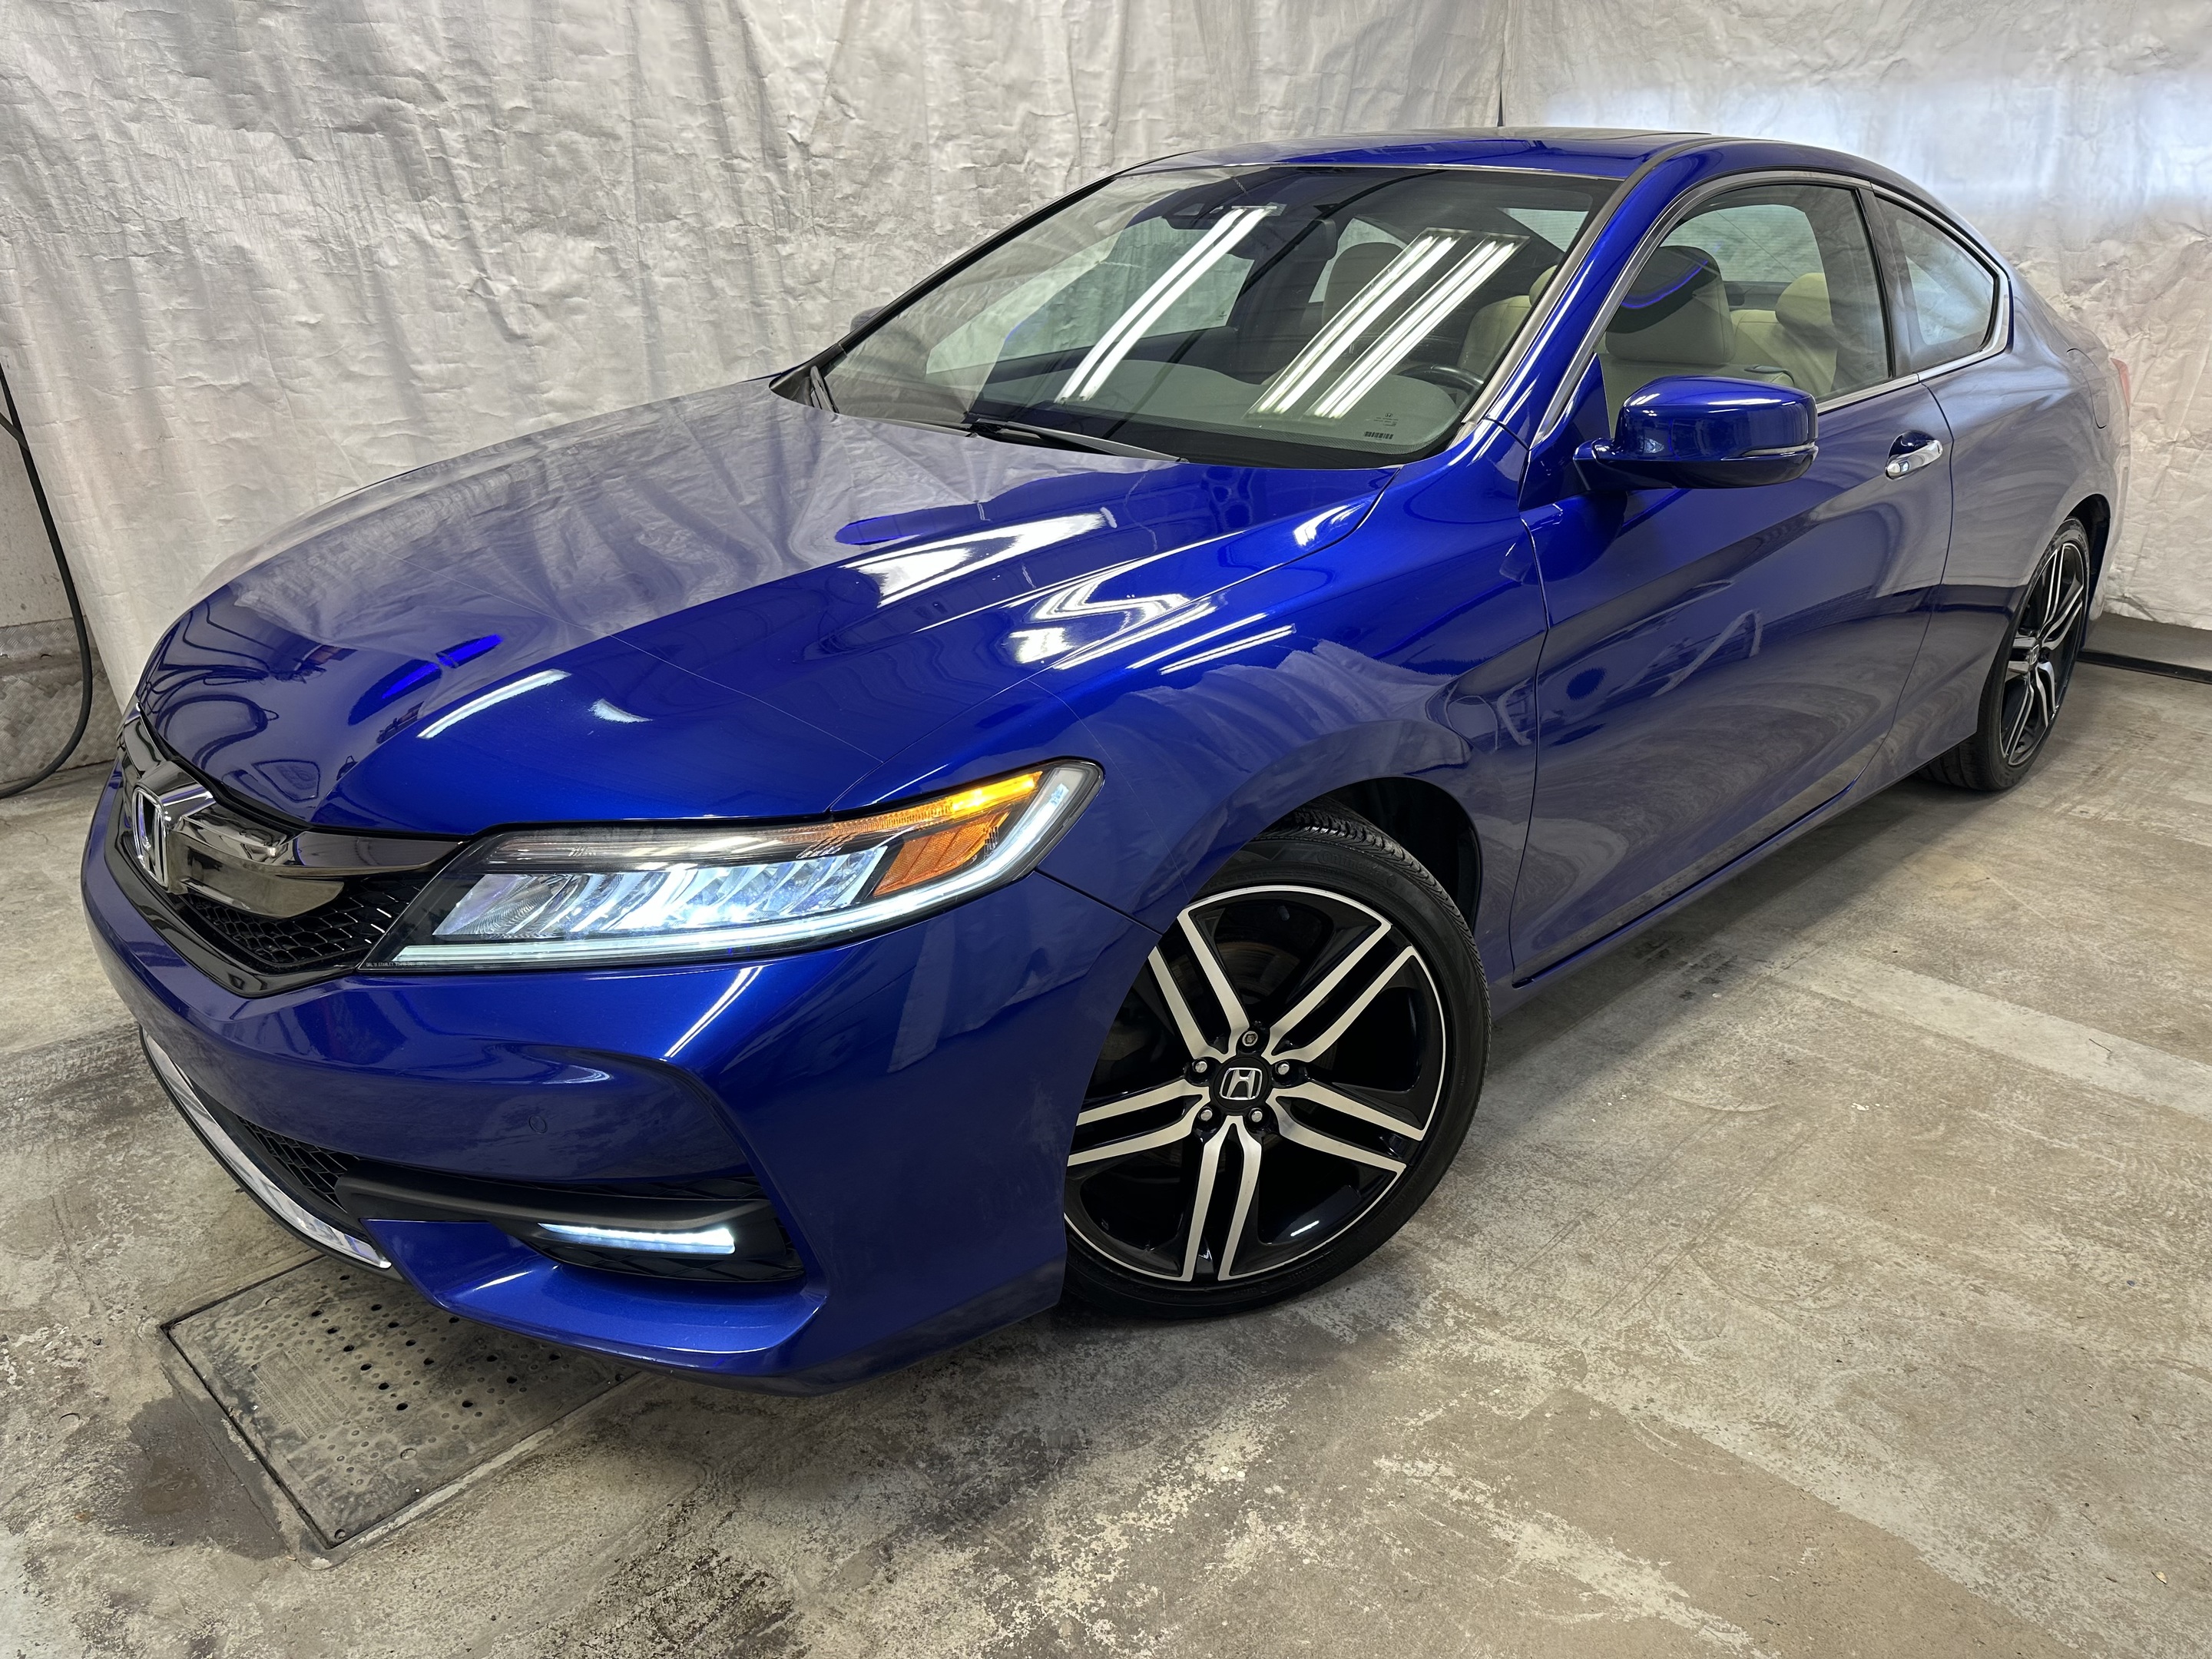 2016 Honda Accord Coupe 2 PORTES Touring cuir toit